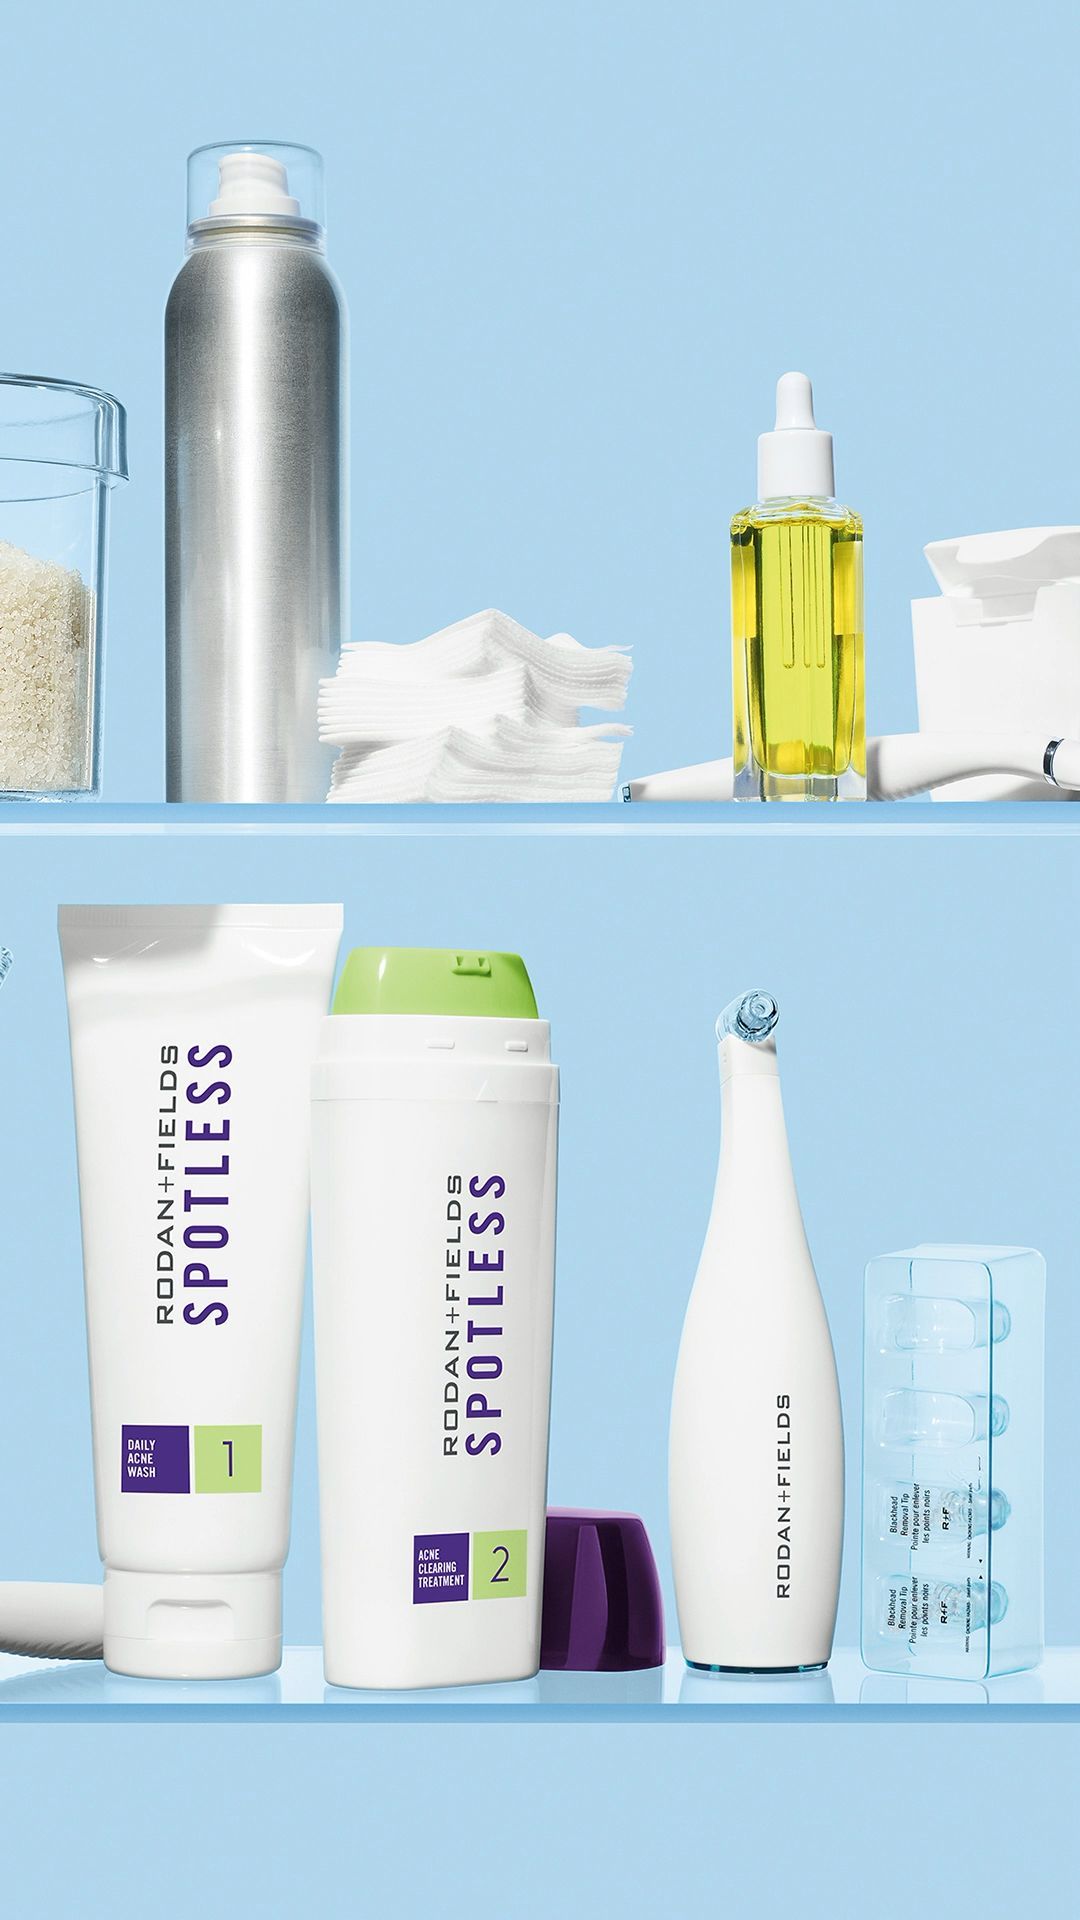 Anyone can use our Pore Cleansing MD -   18 skin care Regimen cleanses ideas